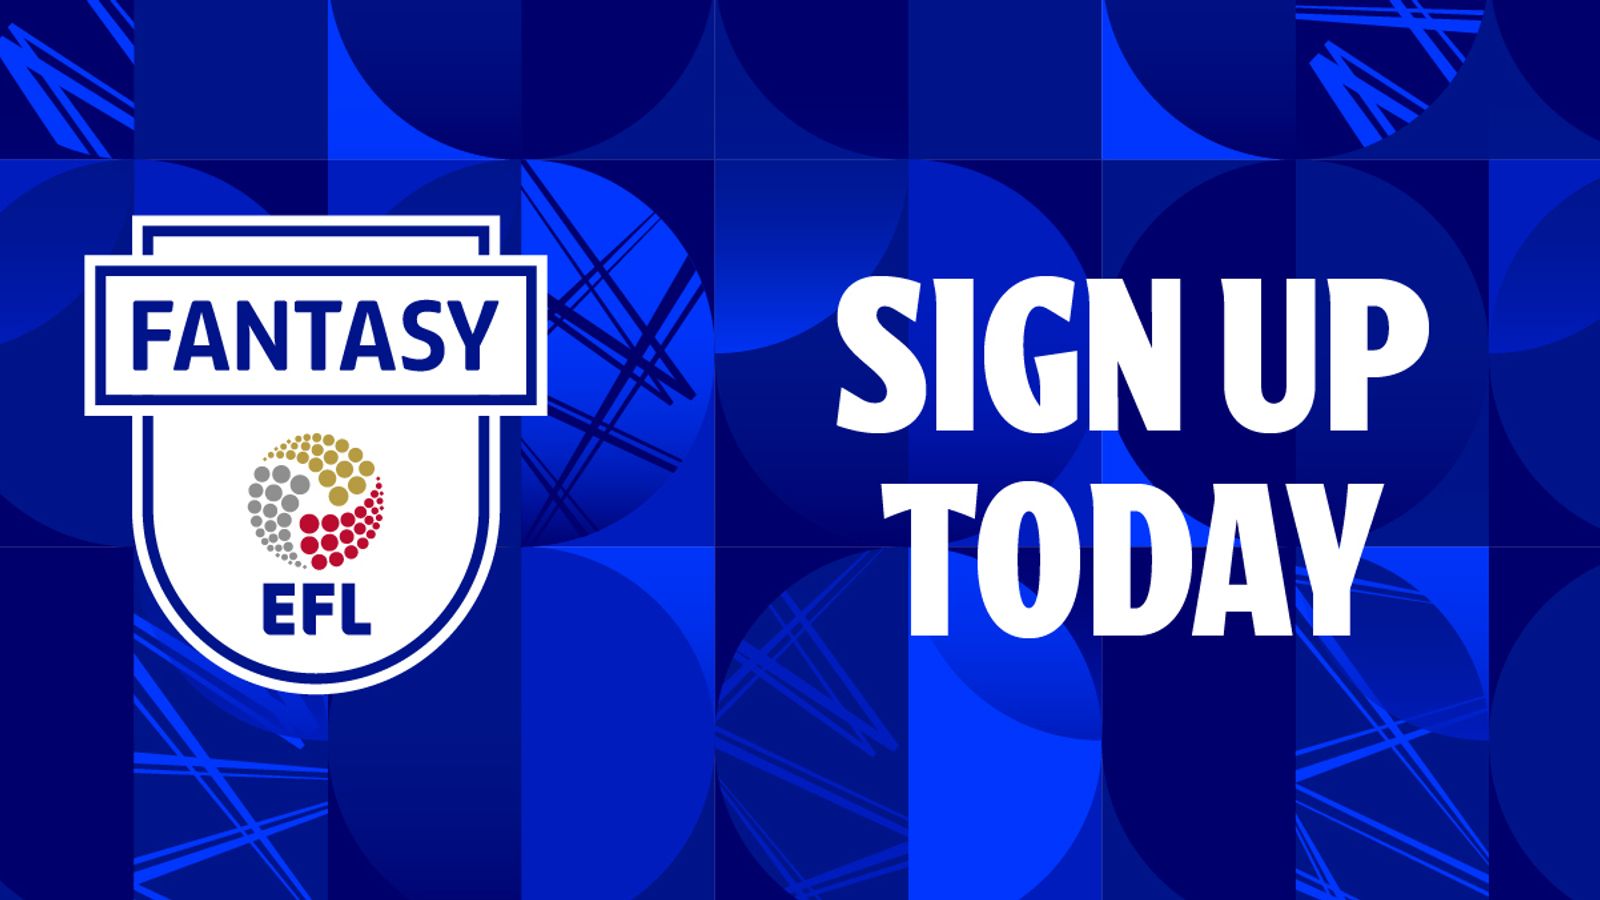 Fantasy EFL: First fantasy football product for English Football League launches